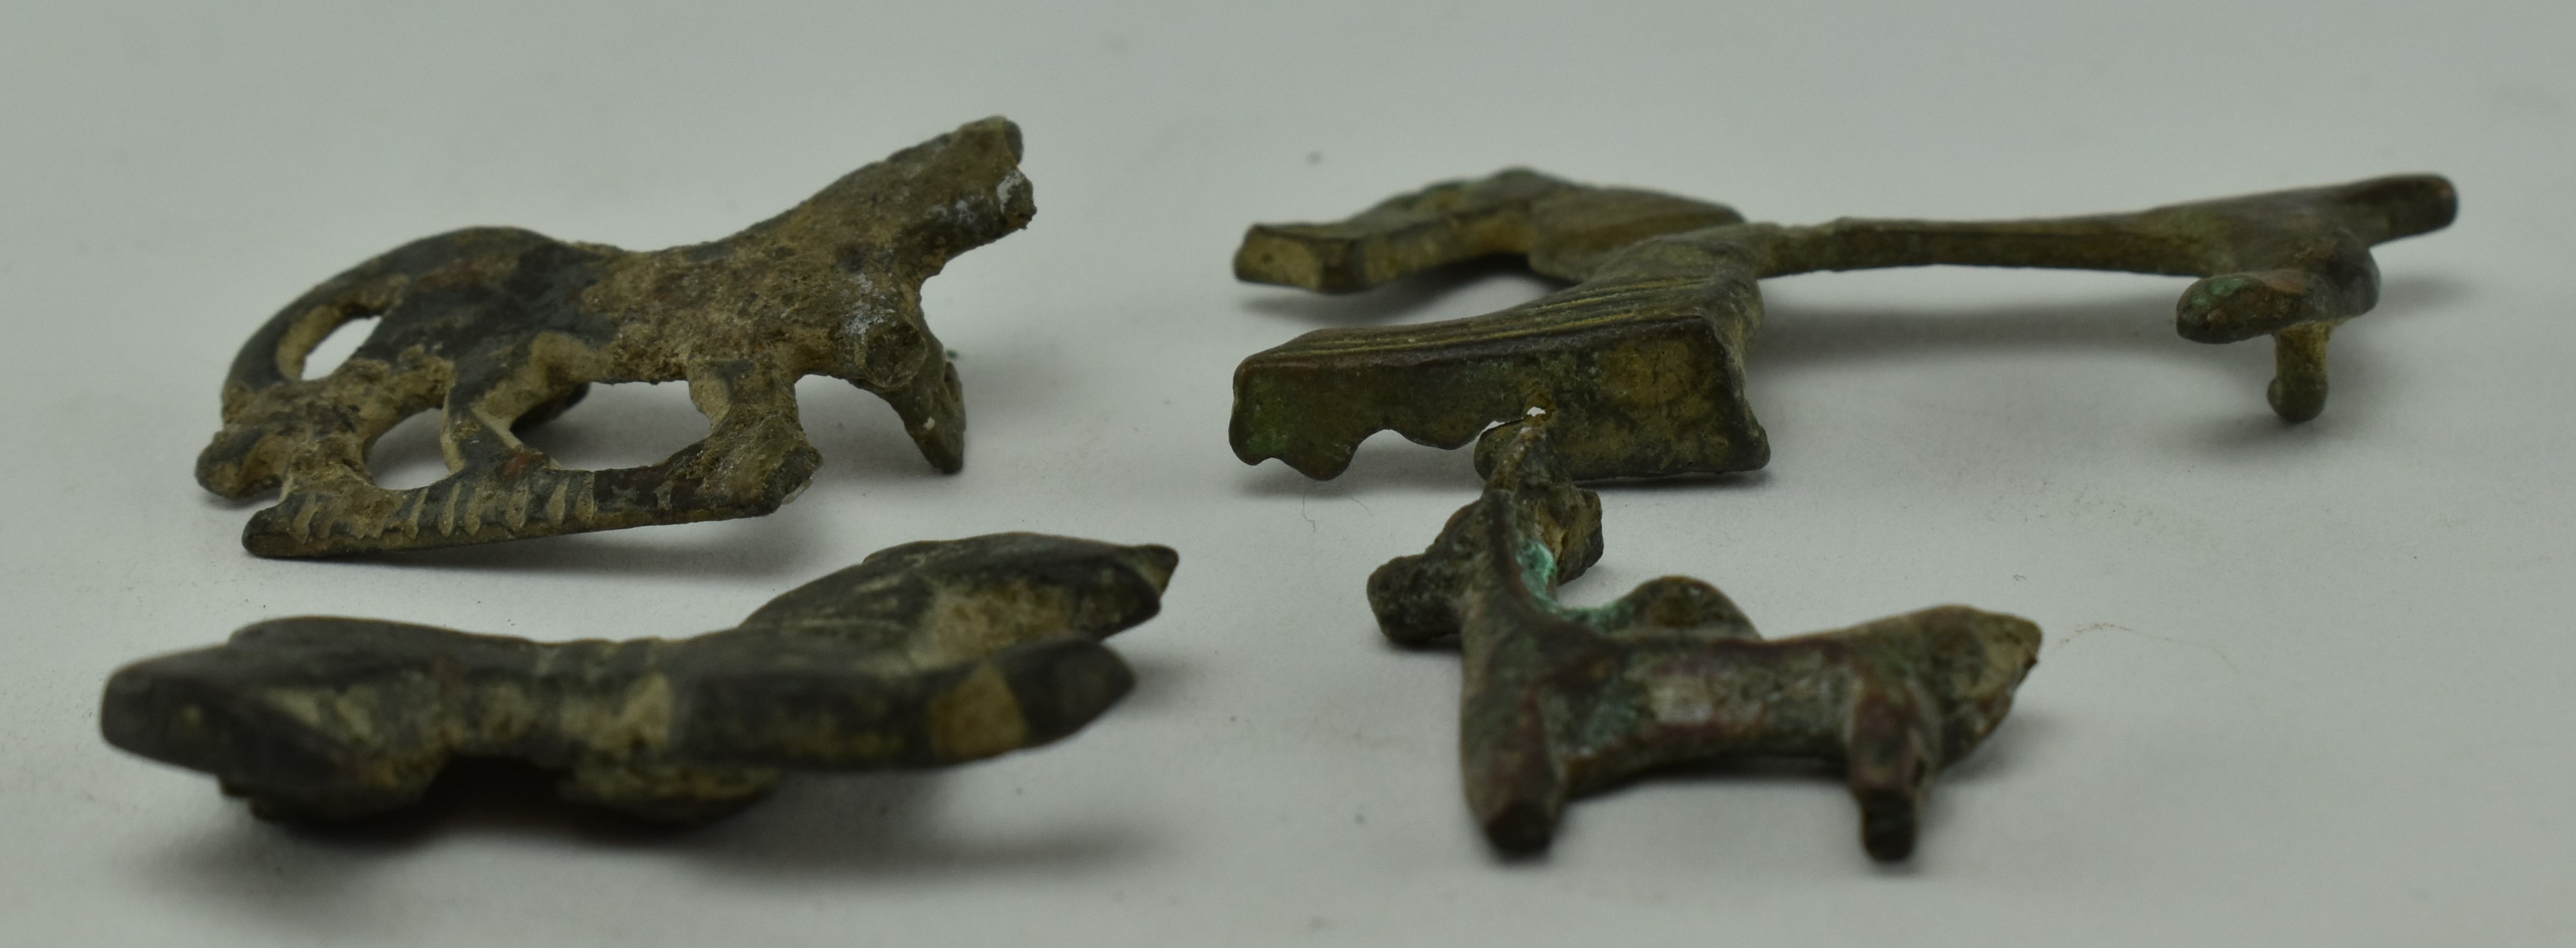 4 PIECES OF ANCIENT ROMAN BRONZE ANIMAL BROOCHES / FIGURINES - Image 2 of 2